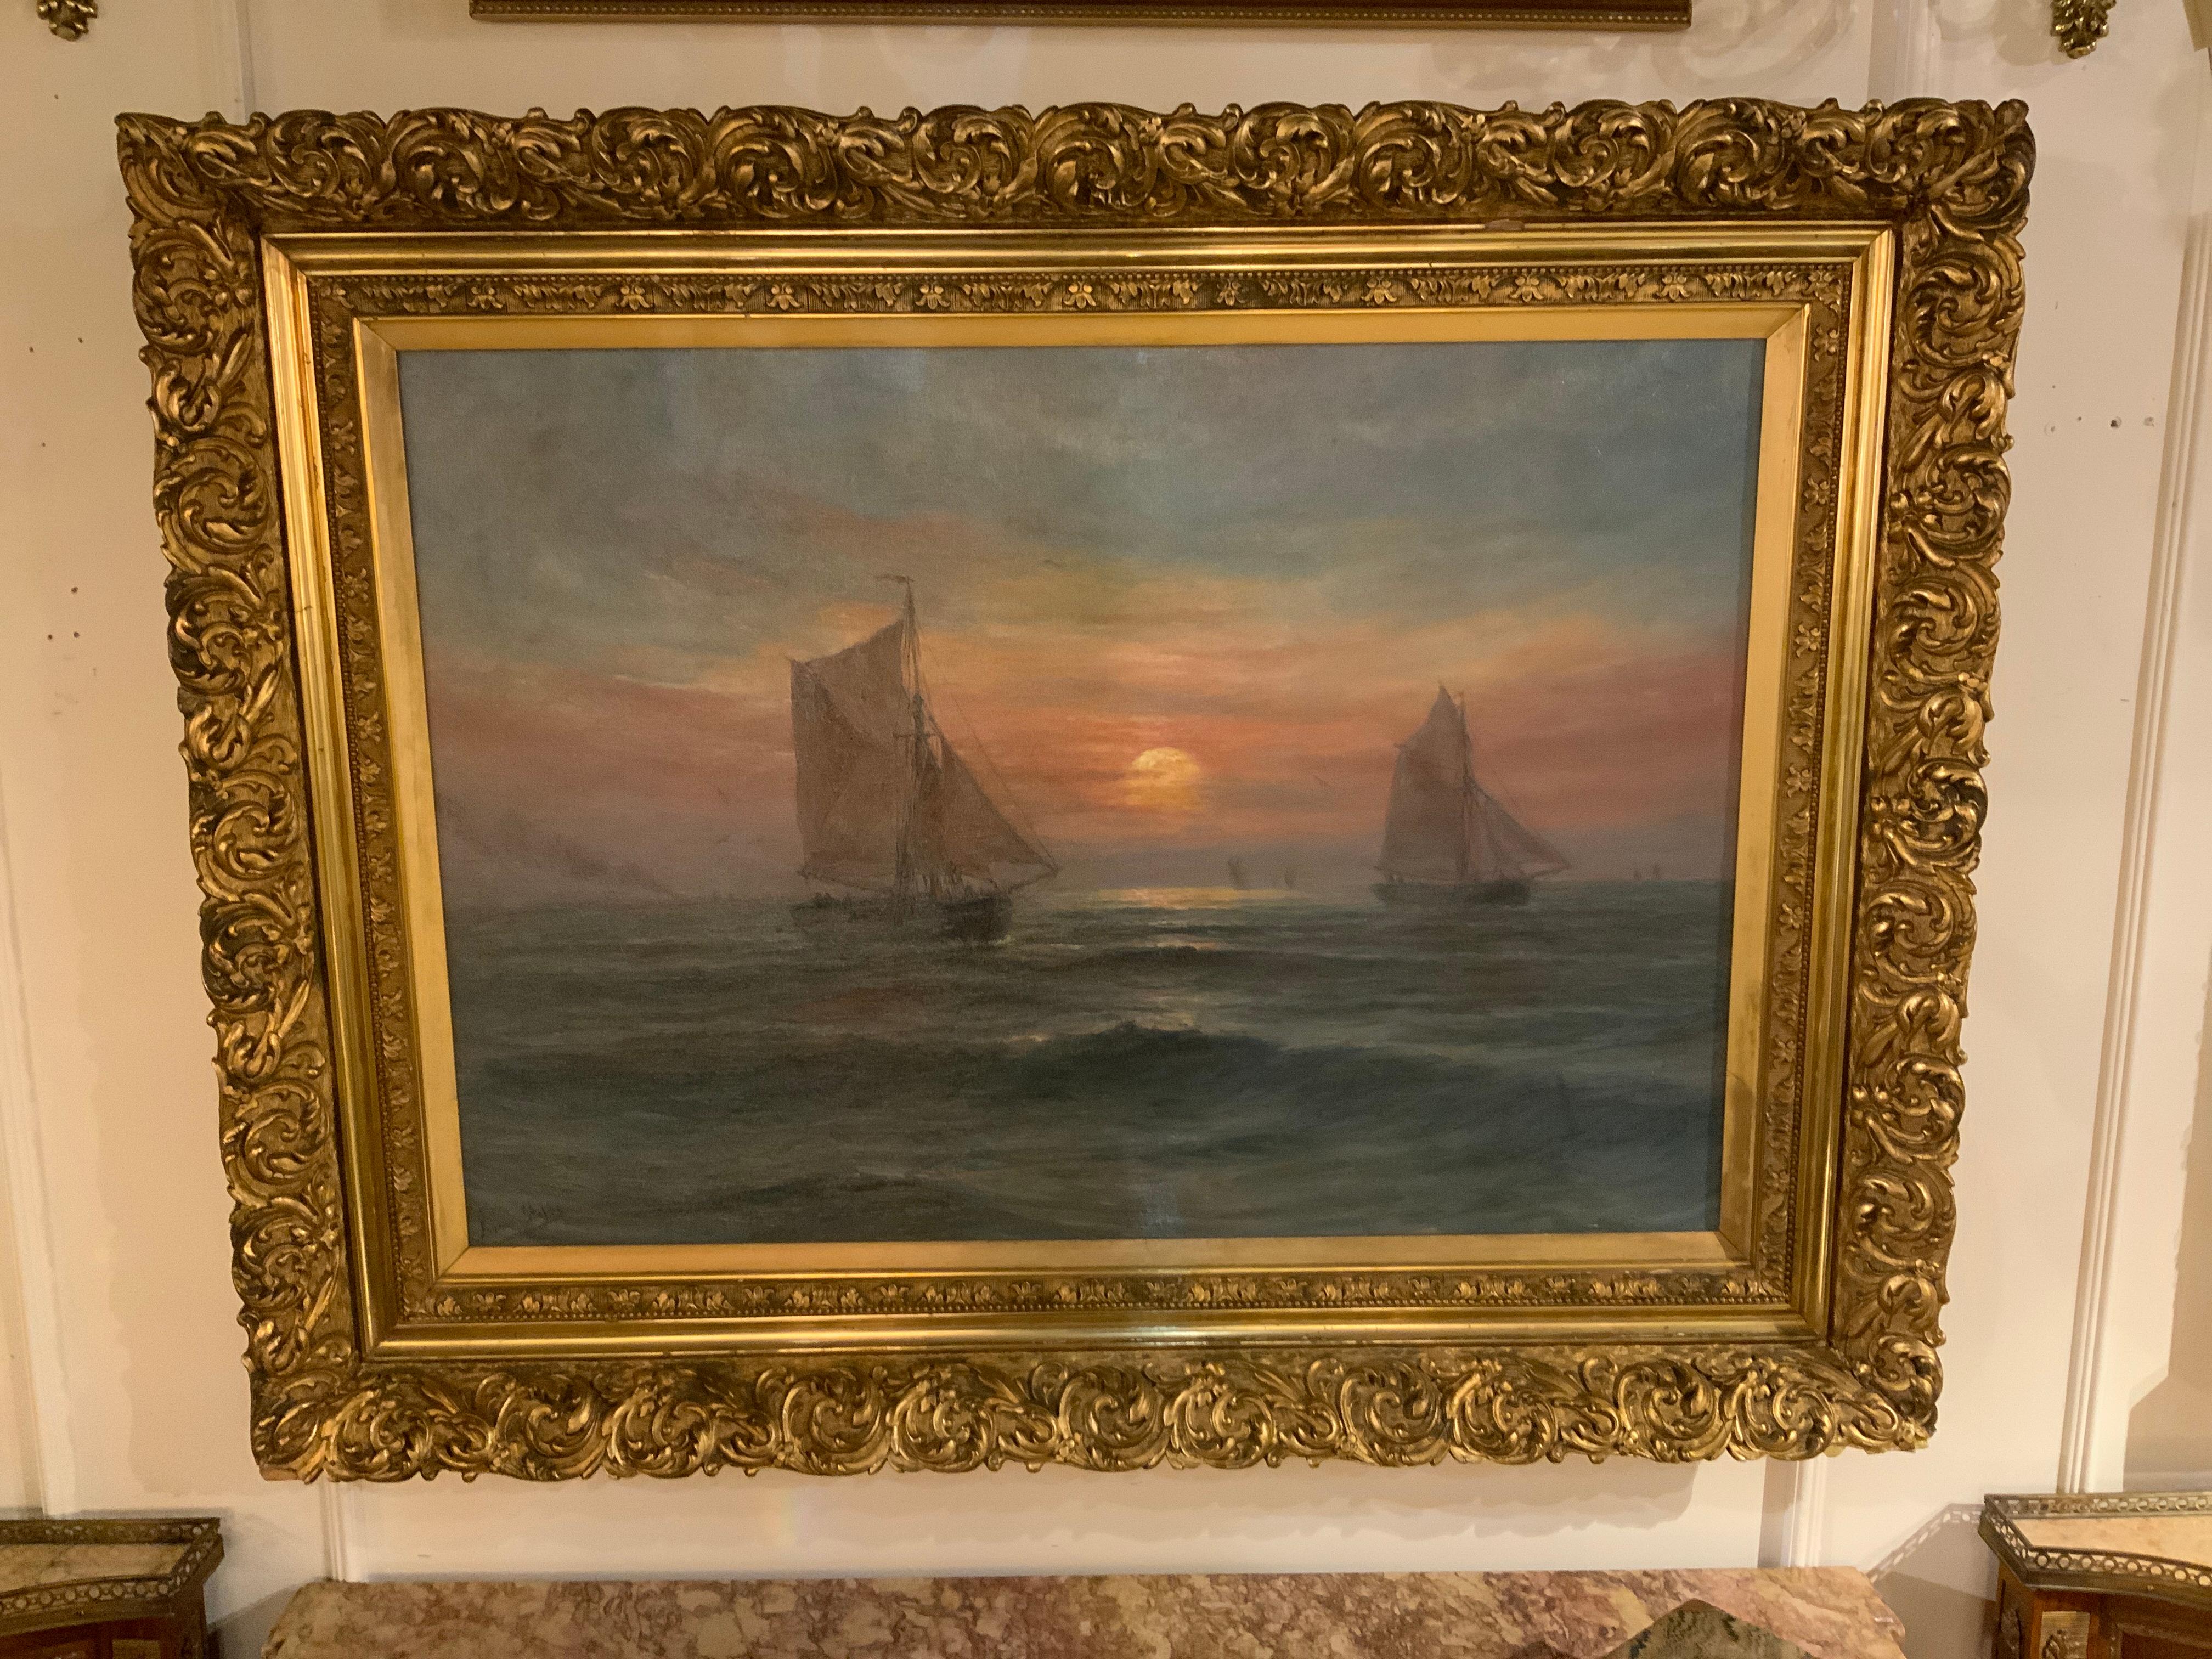 Paint Oil on Canvas, Ships at Sunset Signed Lower Left 